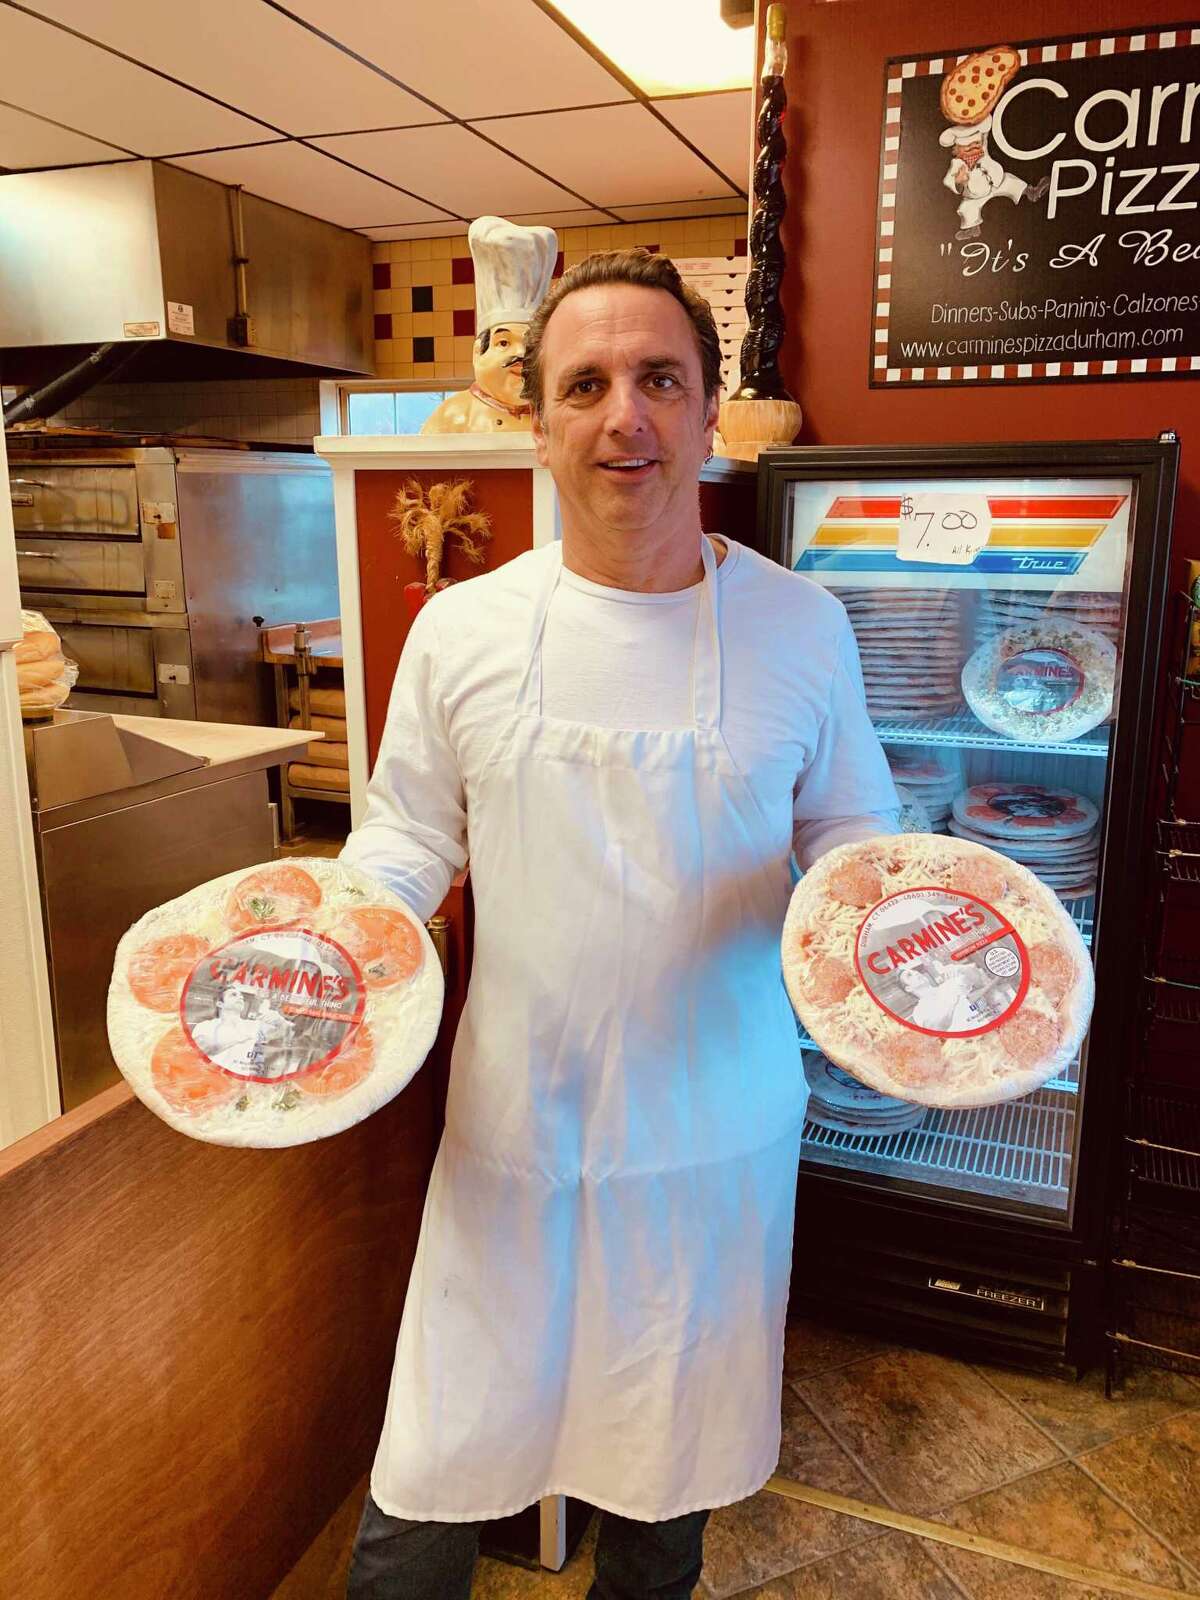 For nearly 18 years, Heath Andranovich, owner of Carmine’s Pizza & Italian Takeout and Carmine’s Frozen Pizzas, has been creating his New Haven-style gourmet pies with locally sourced ingredients using his 100-year-old family recipe.